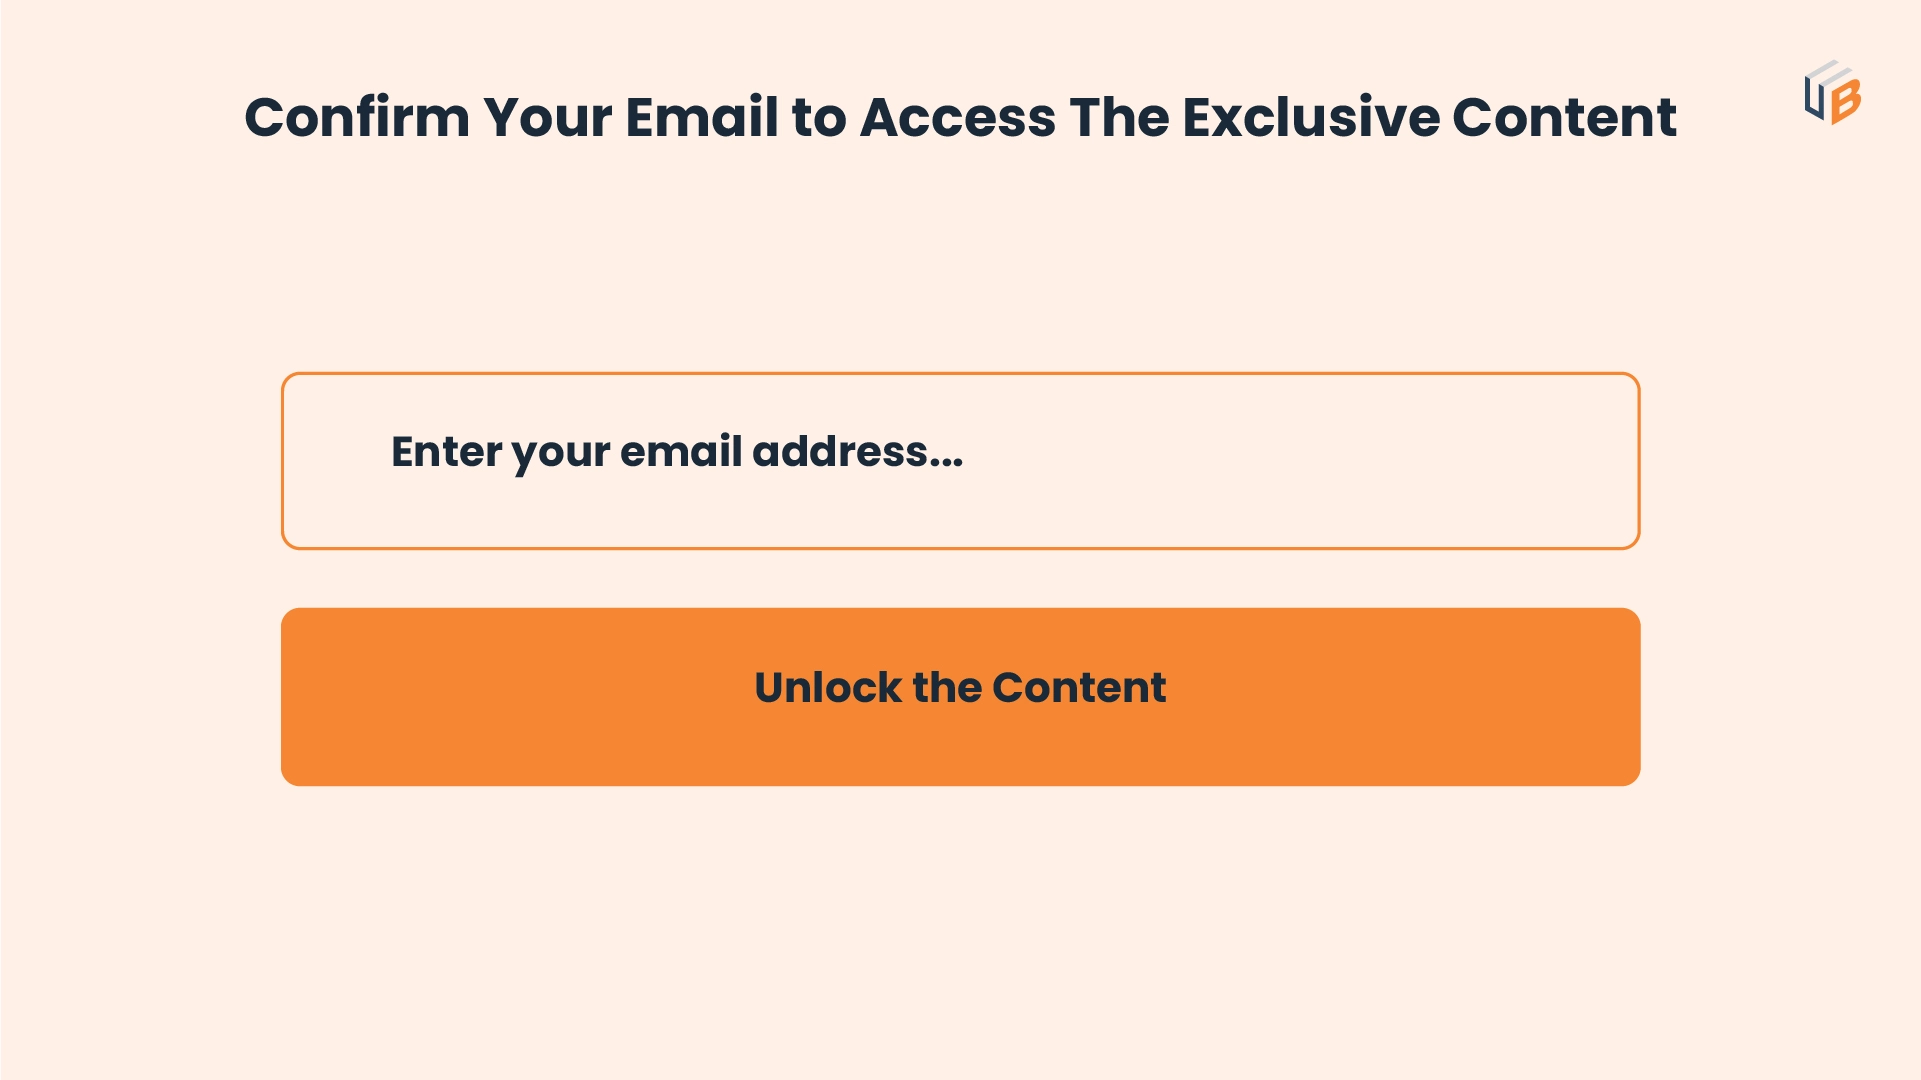 Confirm your Email to Access the Exclusive Content